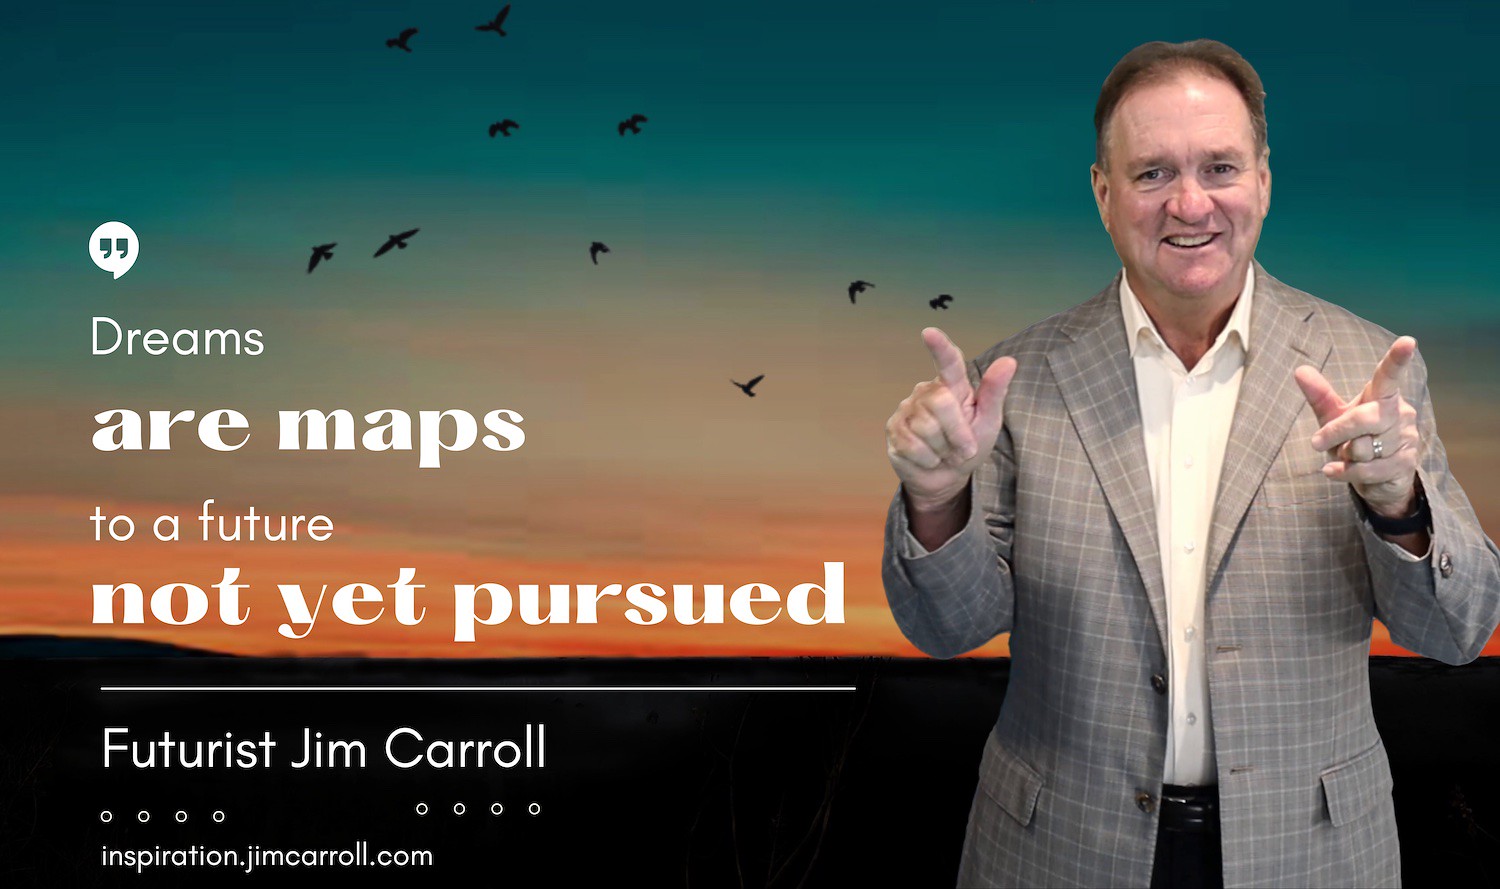 "Dreams are maps to a future not yet pursued!" - Futurist Jim Carroll